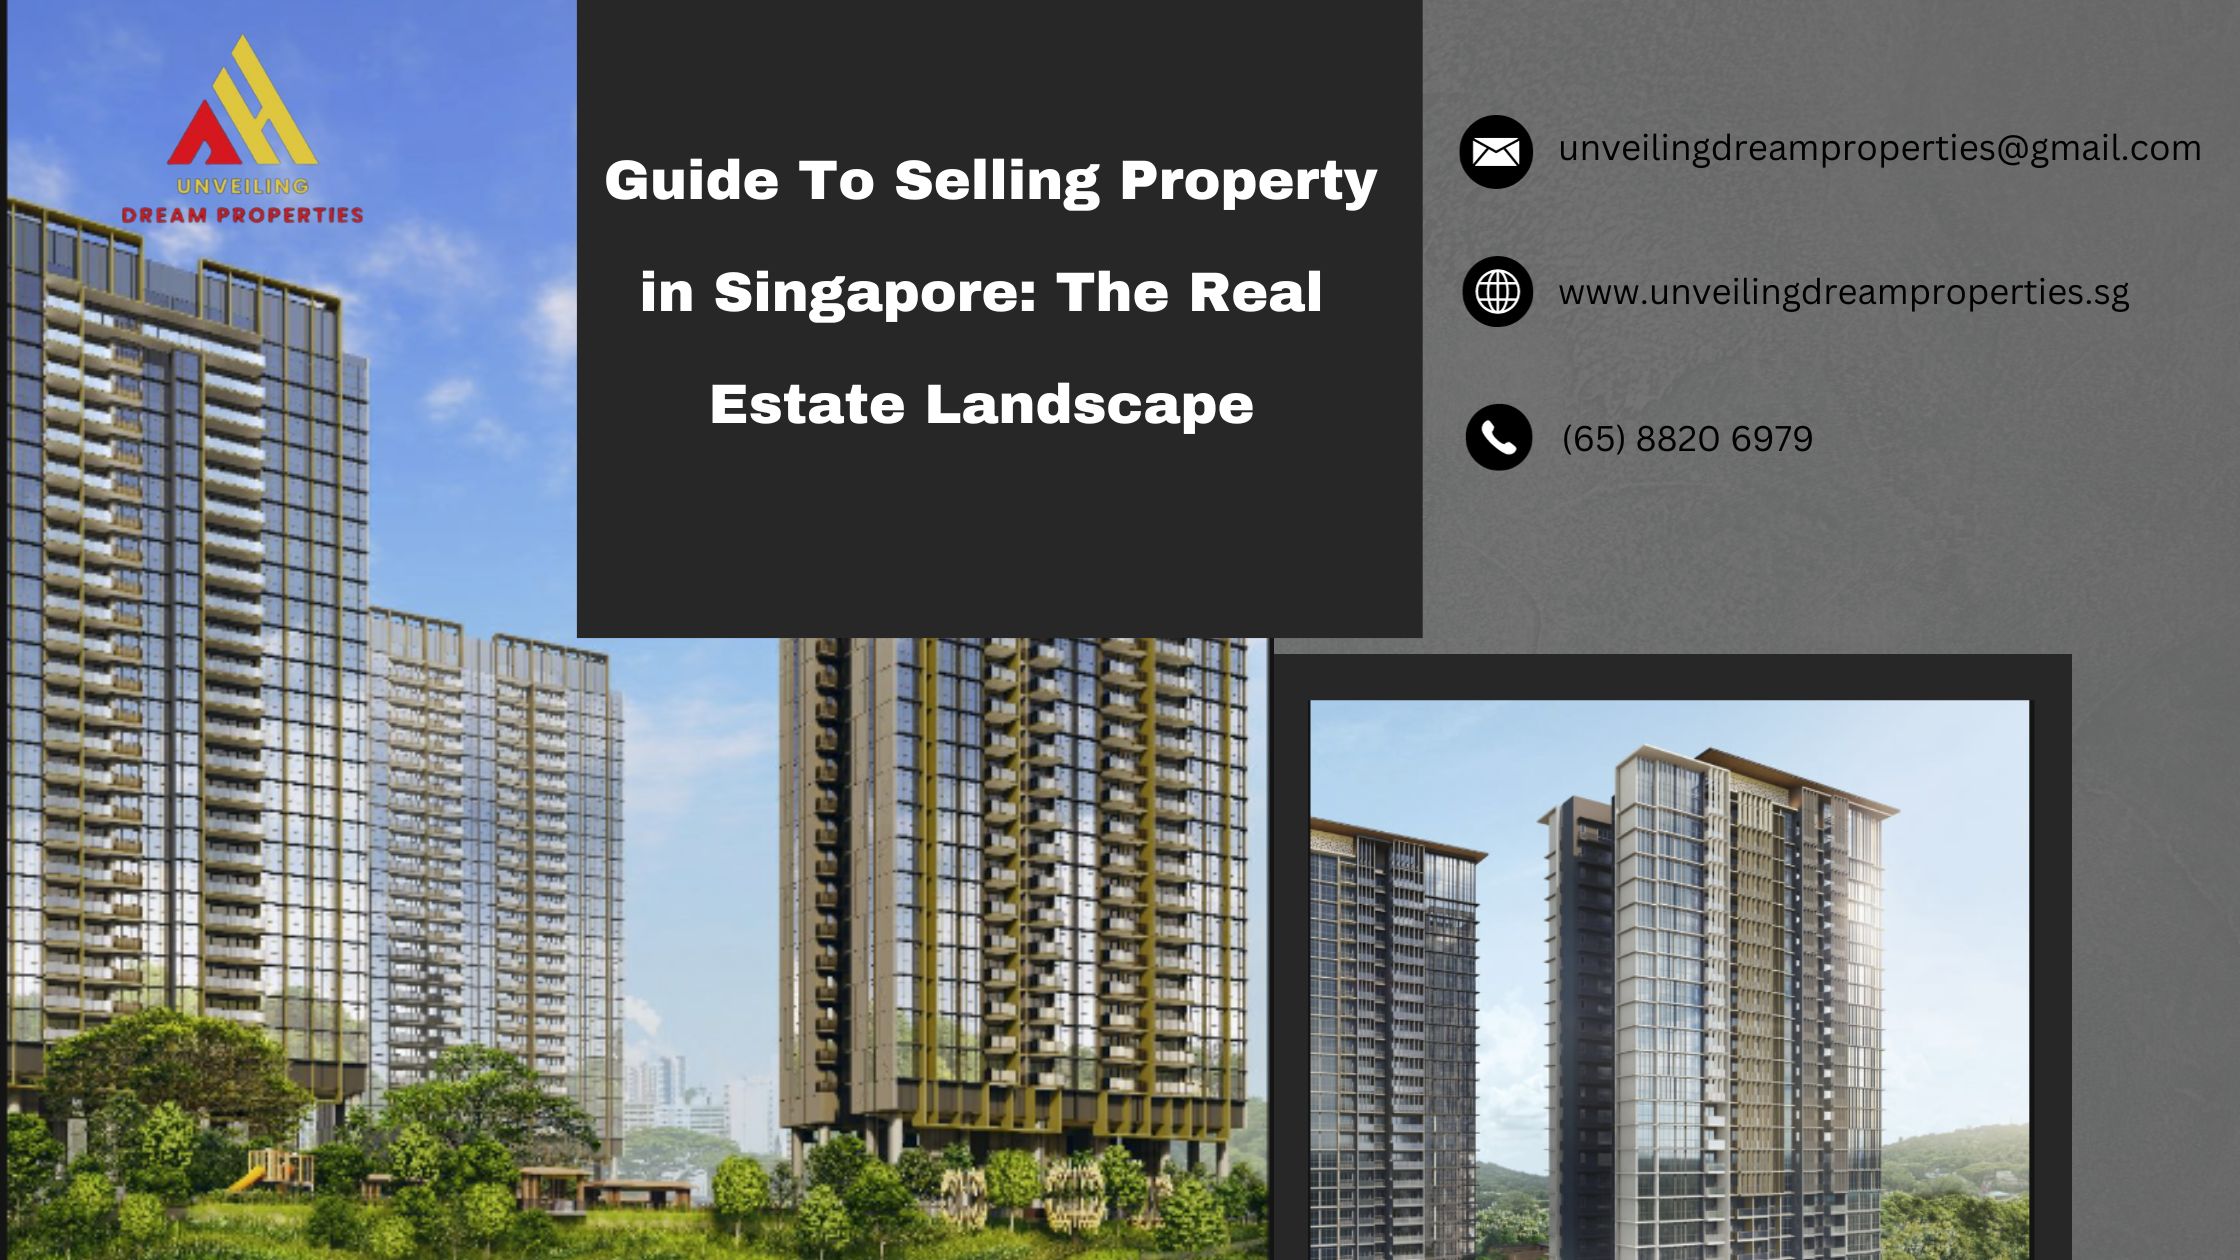 Guide To Selling Property in Singapore: The Real Estate Landscape